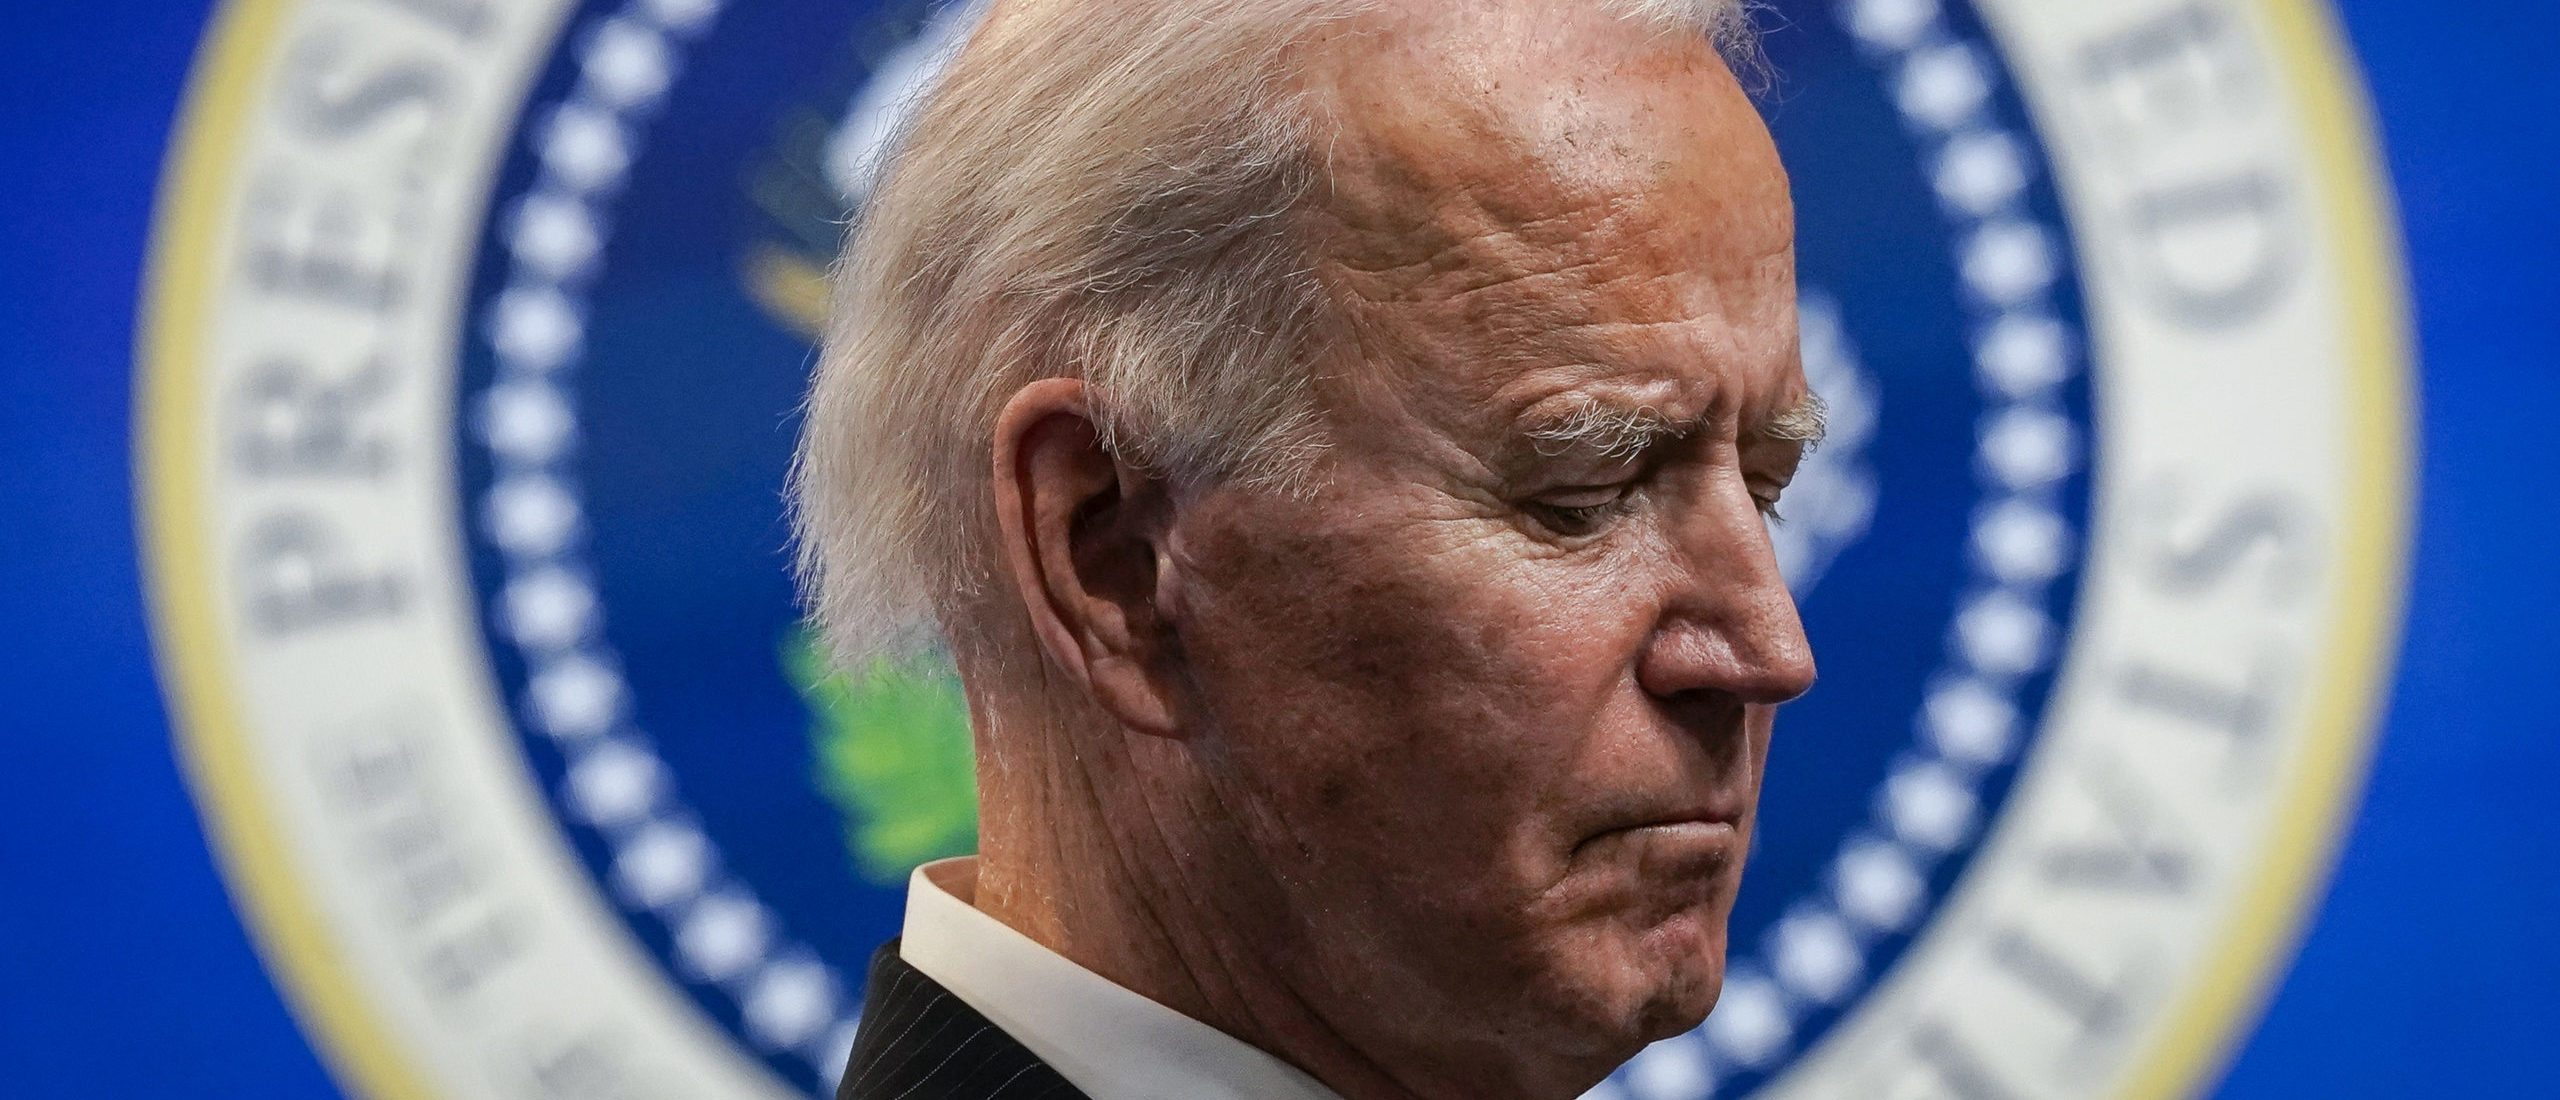 Biden Taking Executive Action To Address Racial ‘equity — Two Orders Will Reportedly Undo Major 